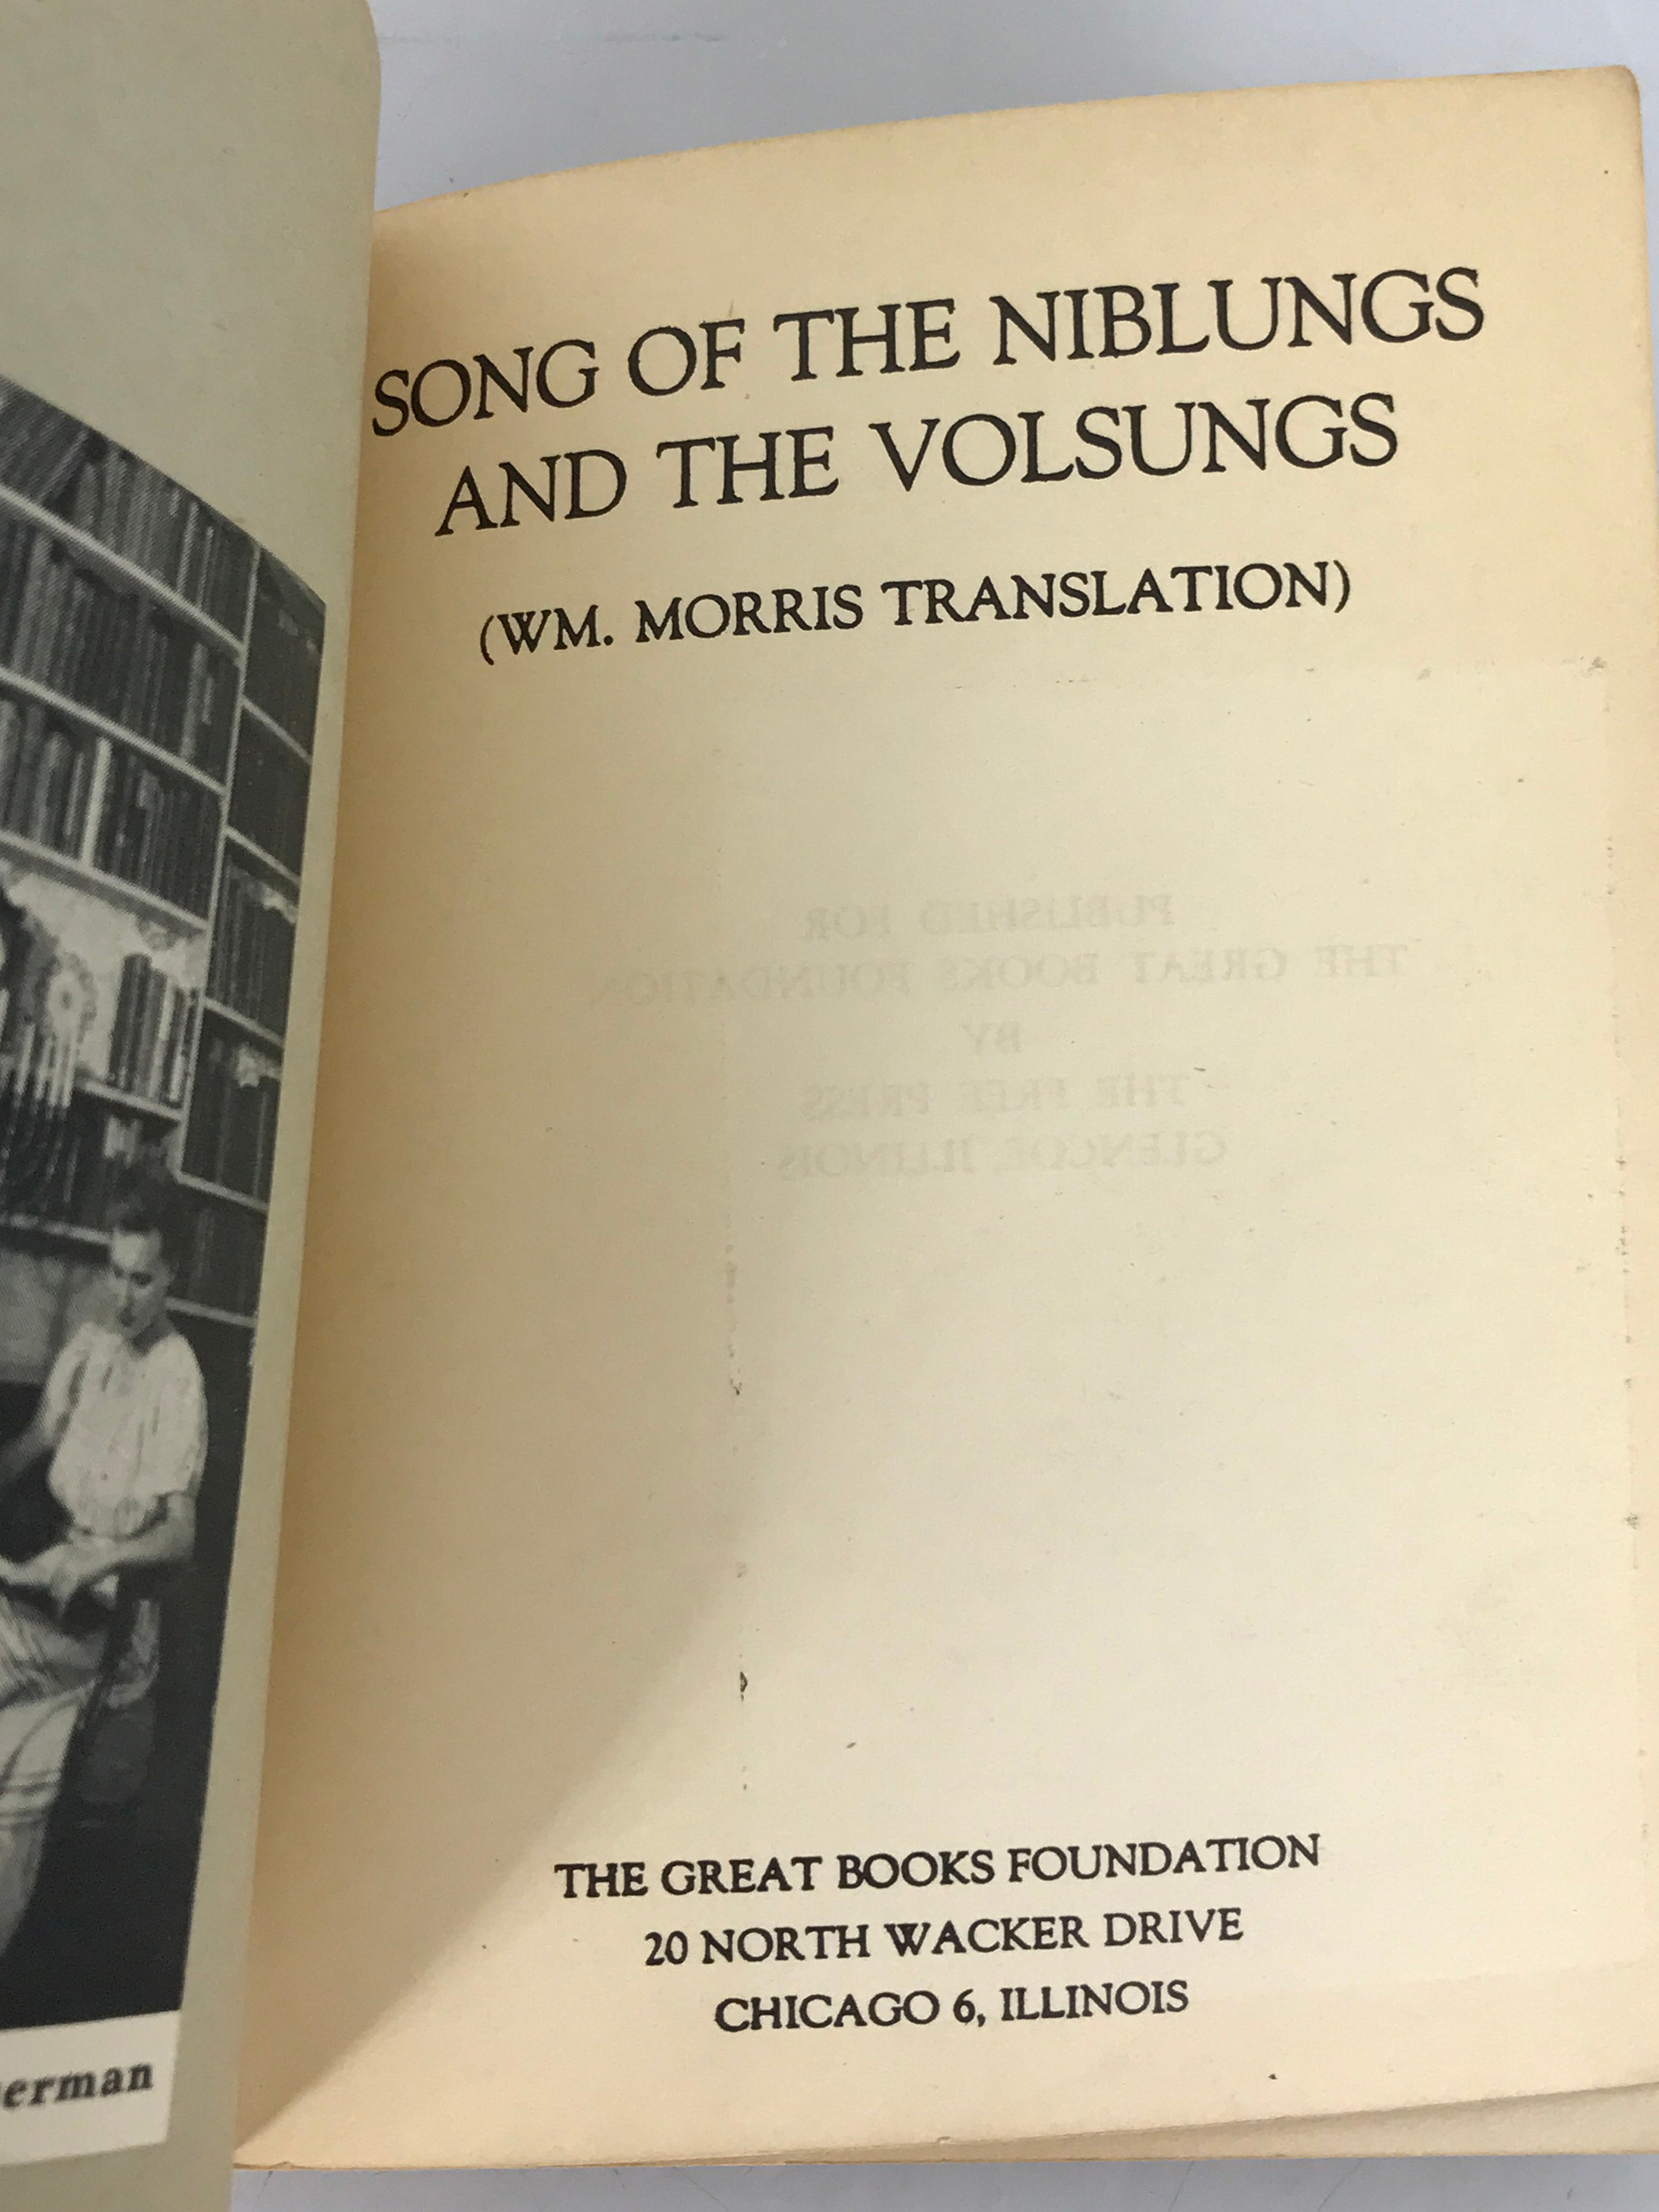 Song of the Niblungs and the Volsungs (Wm Morris Translation) c1949 SC Rare